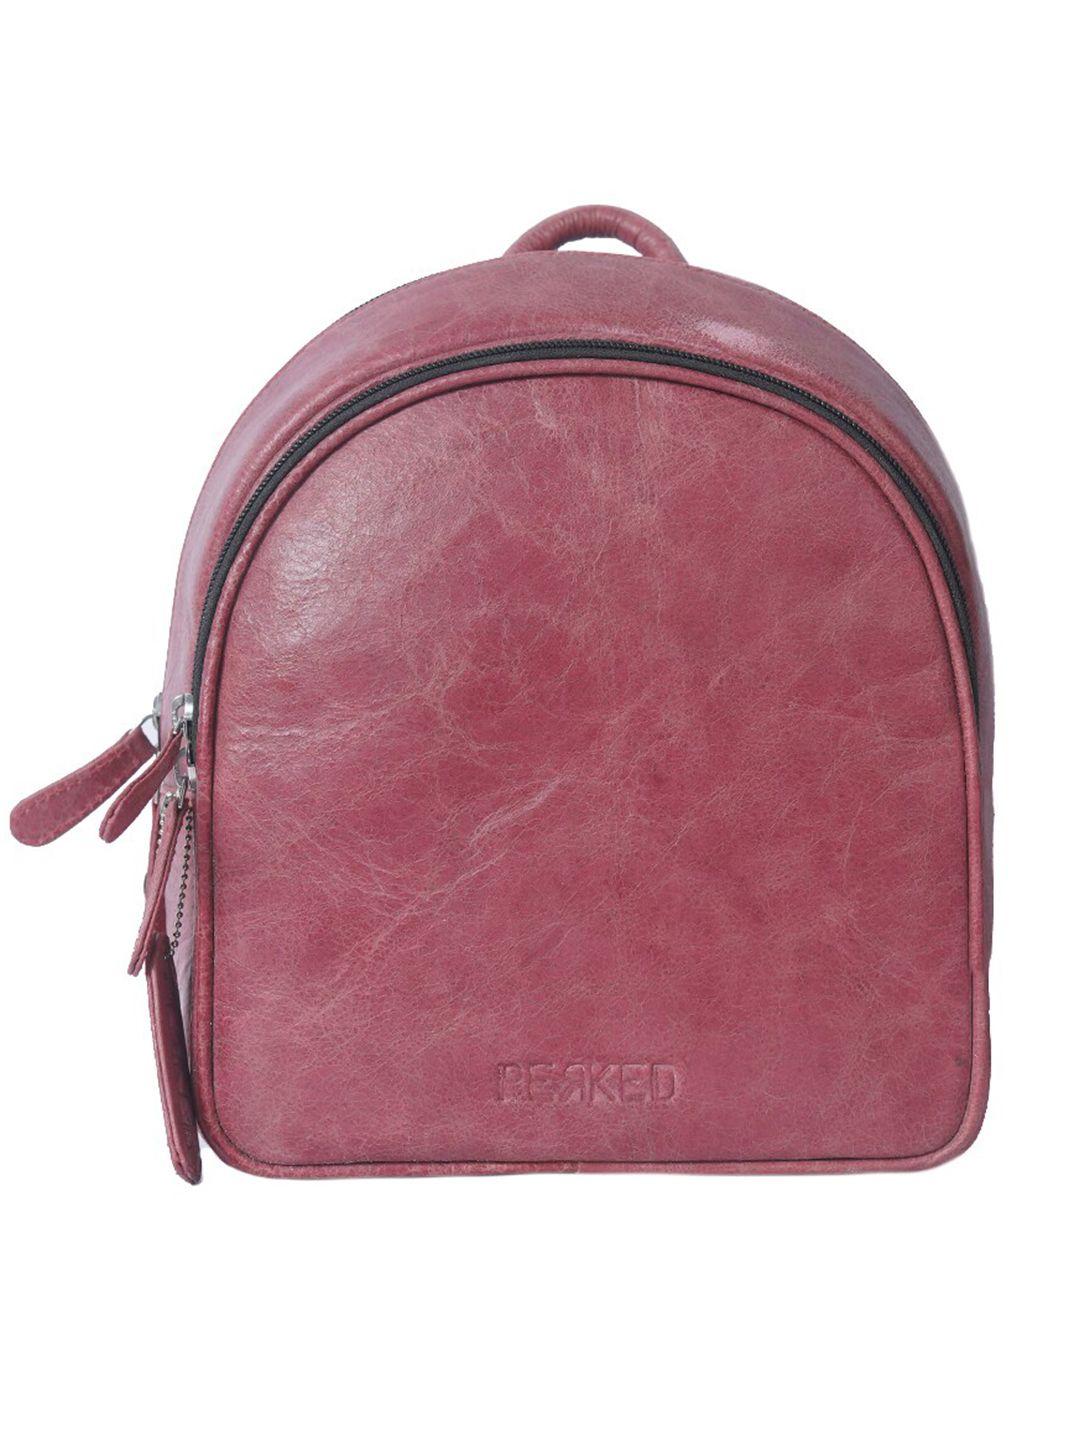 perked red textured backpack